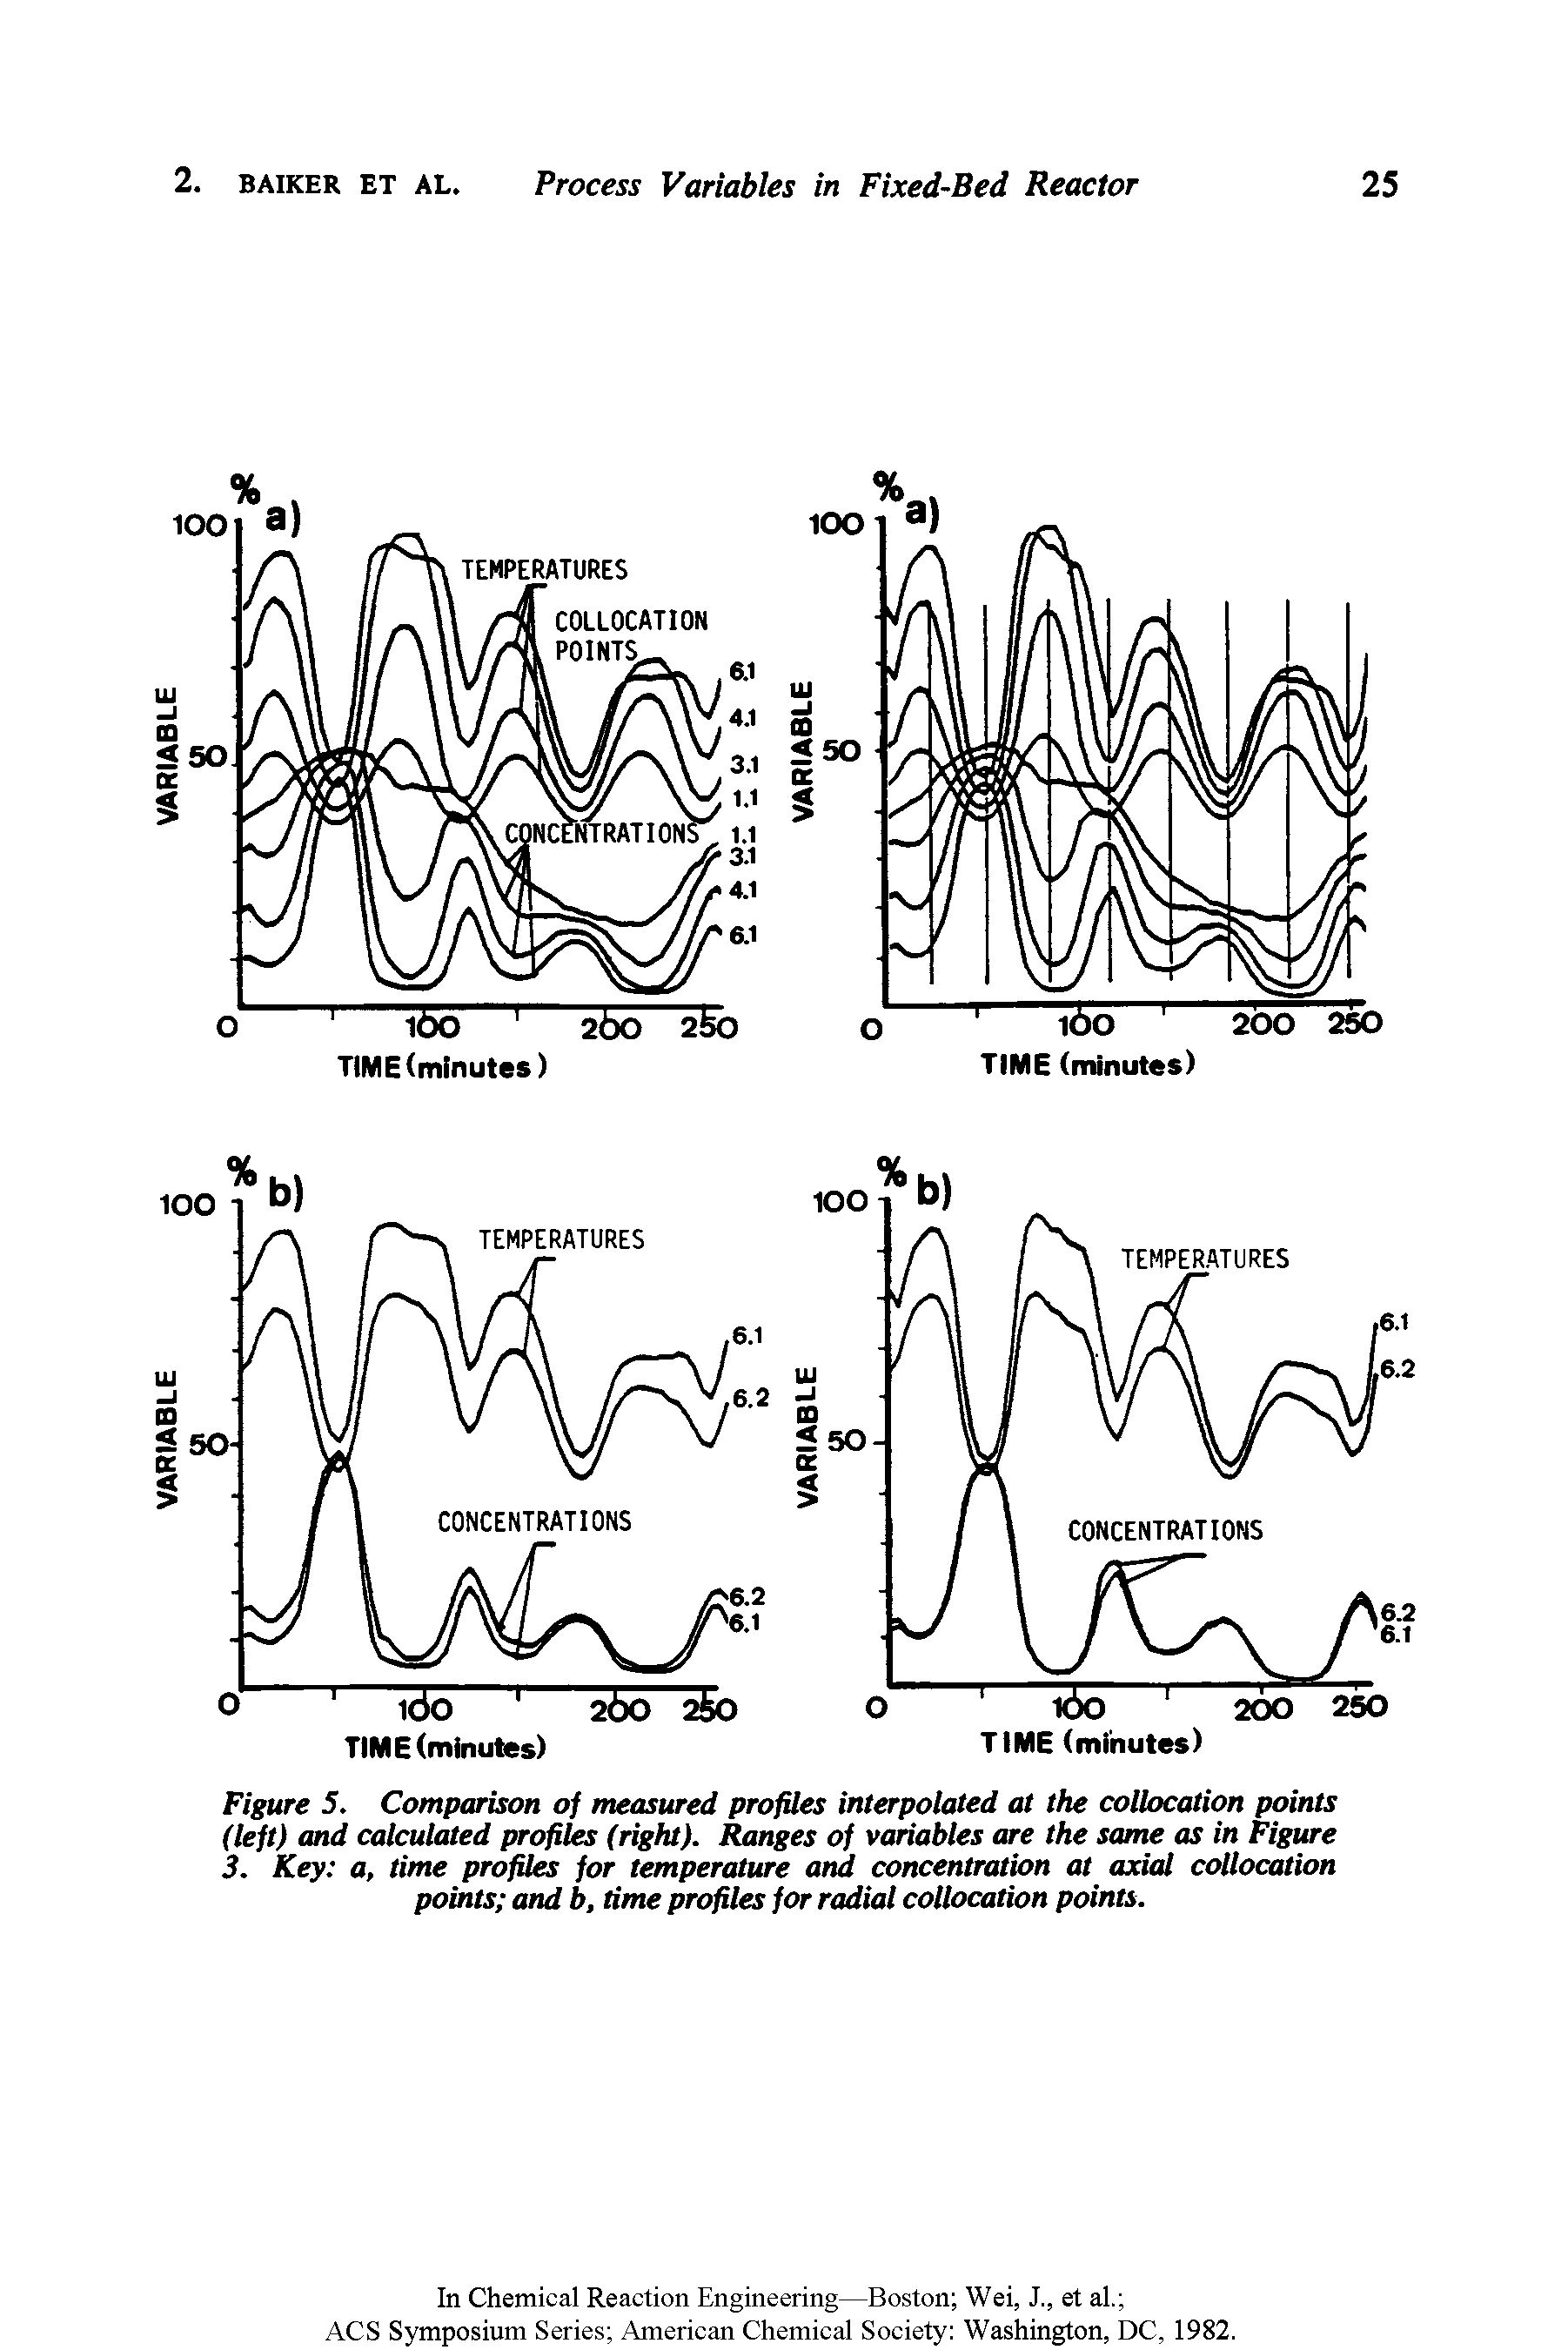 Figure 5. Comparison of measured profiles interpolated at the collocation points (left) and calculated profiles (right). Ranges of variables are the same as in Figure 3. Key a, time profiles for temperature and concentration at axial collocation points and b, time profiles for radial collocation points.